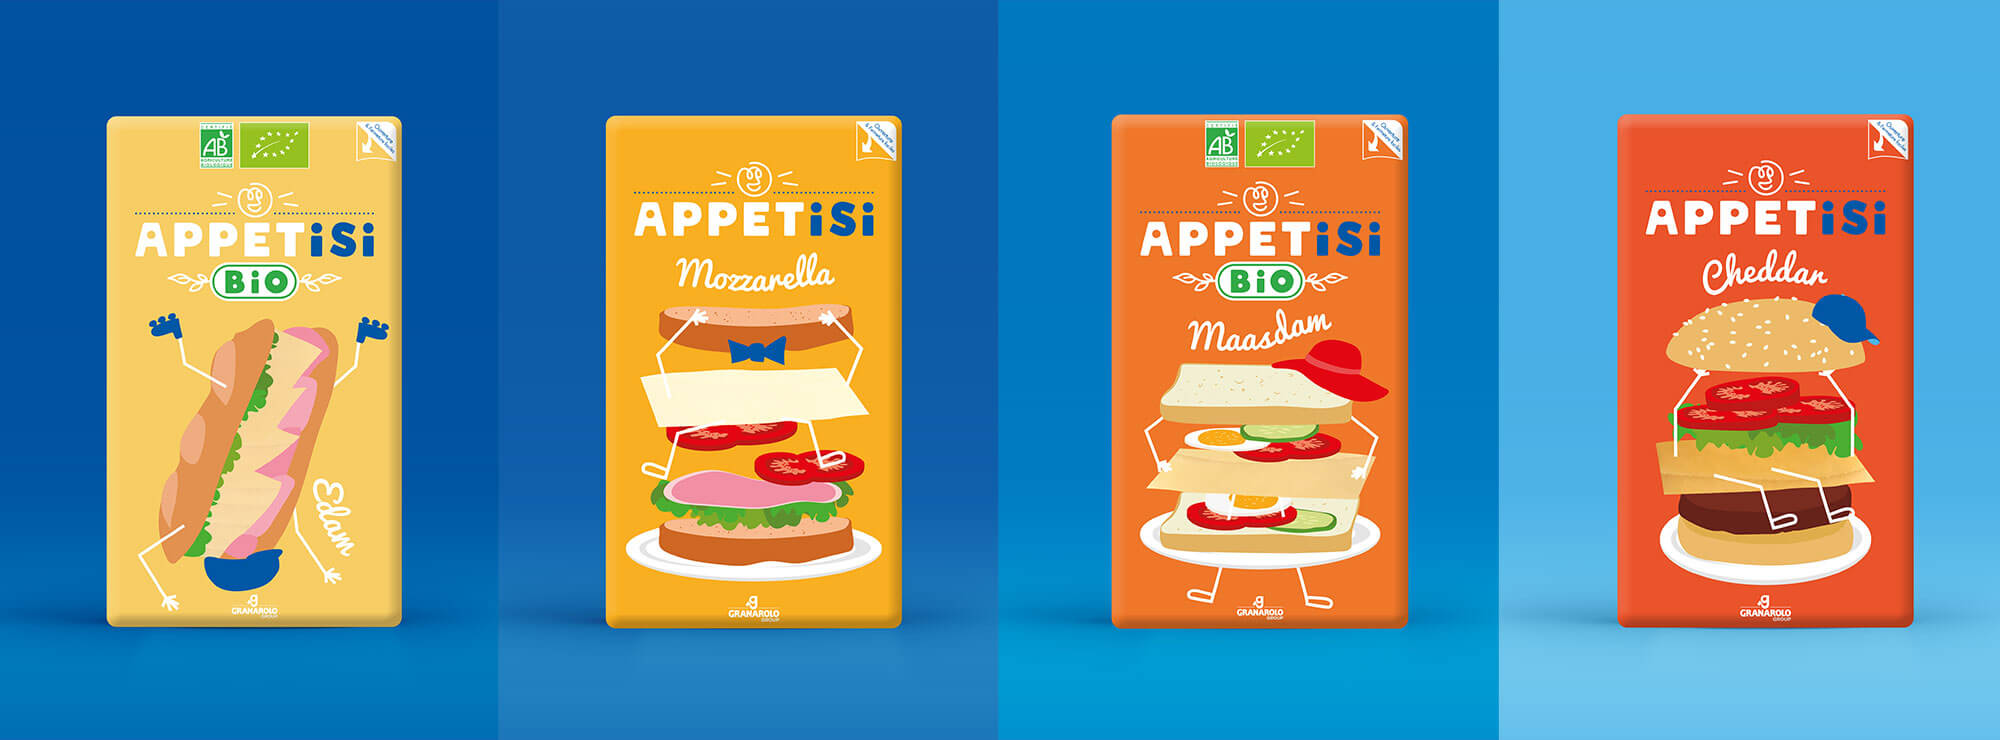 Appetisi by Granarolo - an identity package to snack on